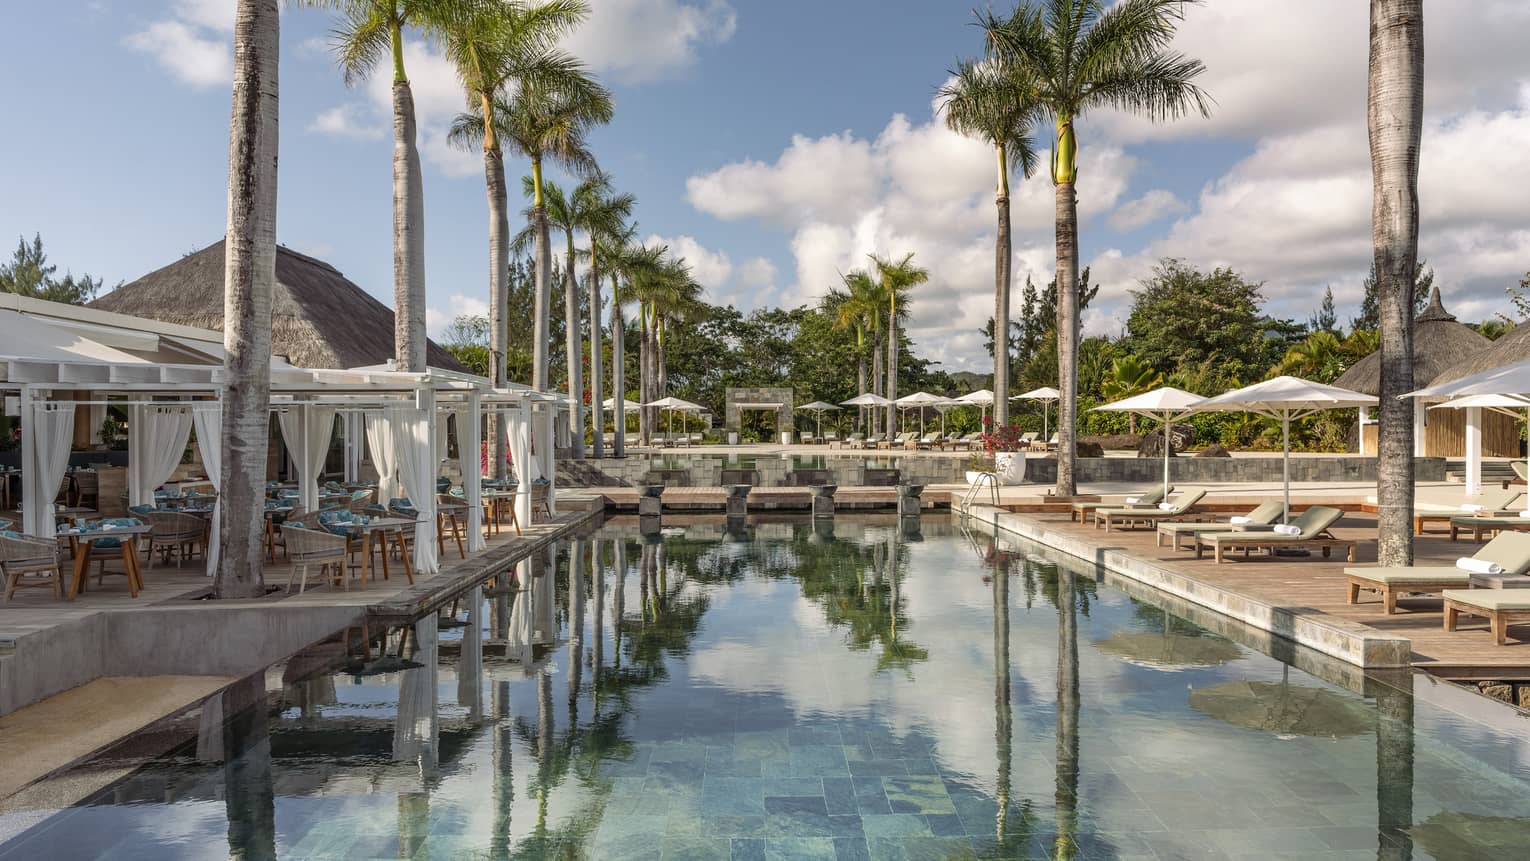 Outdoor pool flanked by palm trees, cabanas and lounge chairs with umbrellas